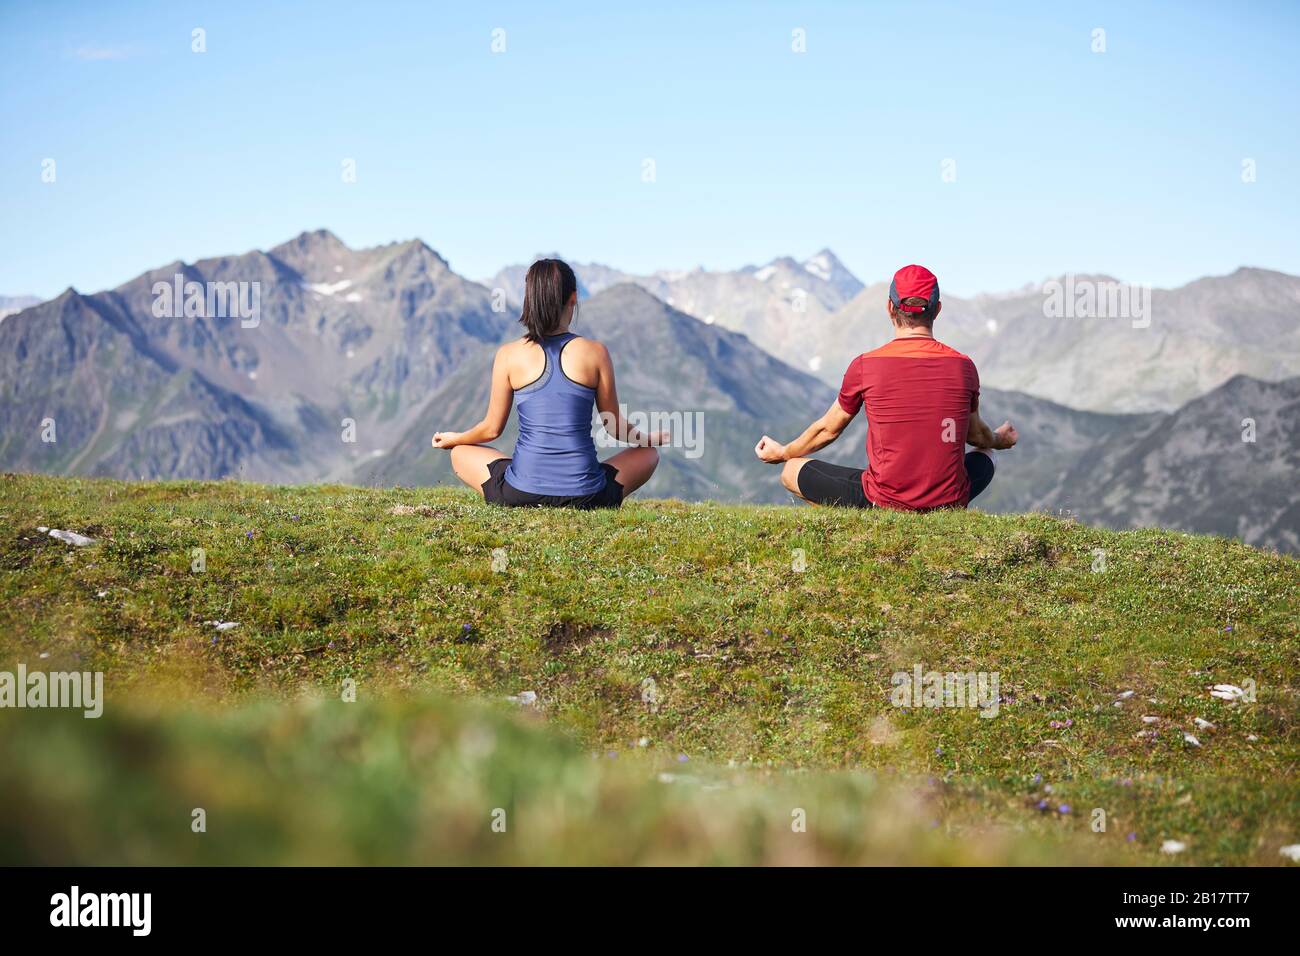 Man and woman meditating in the mountains, rear view Stock Photo